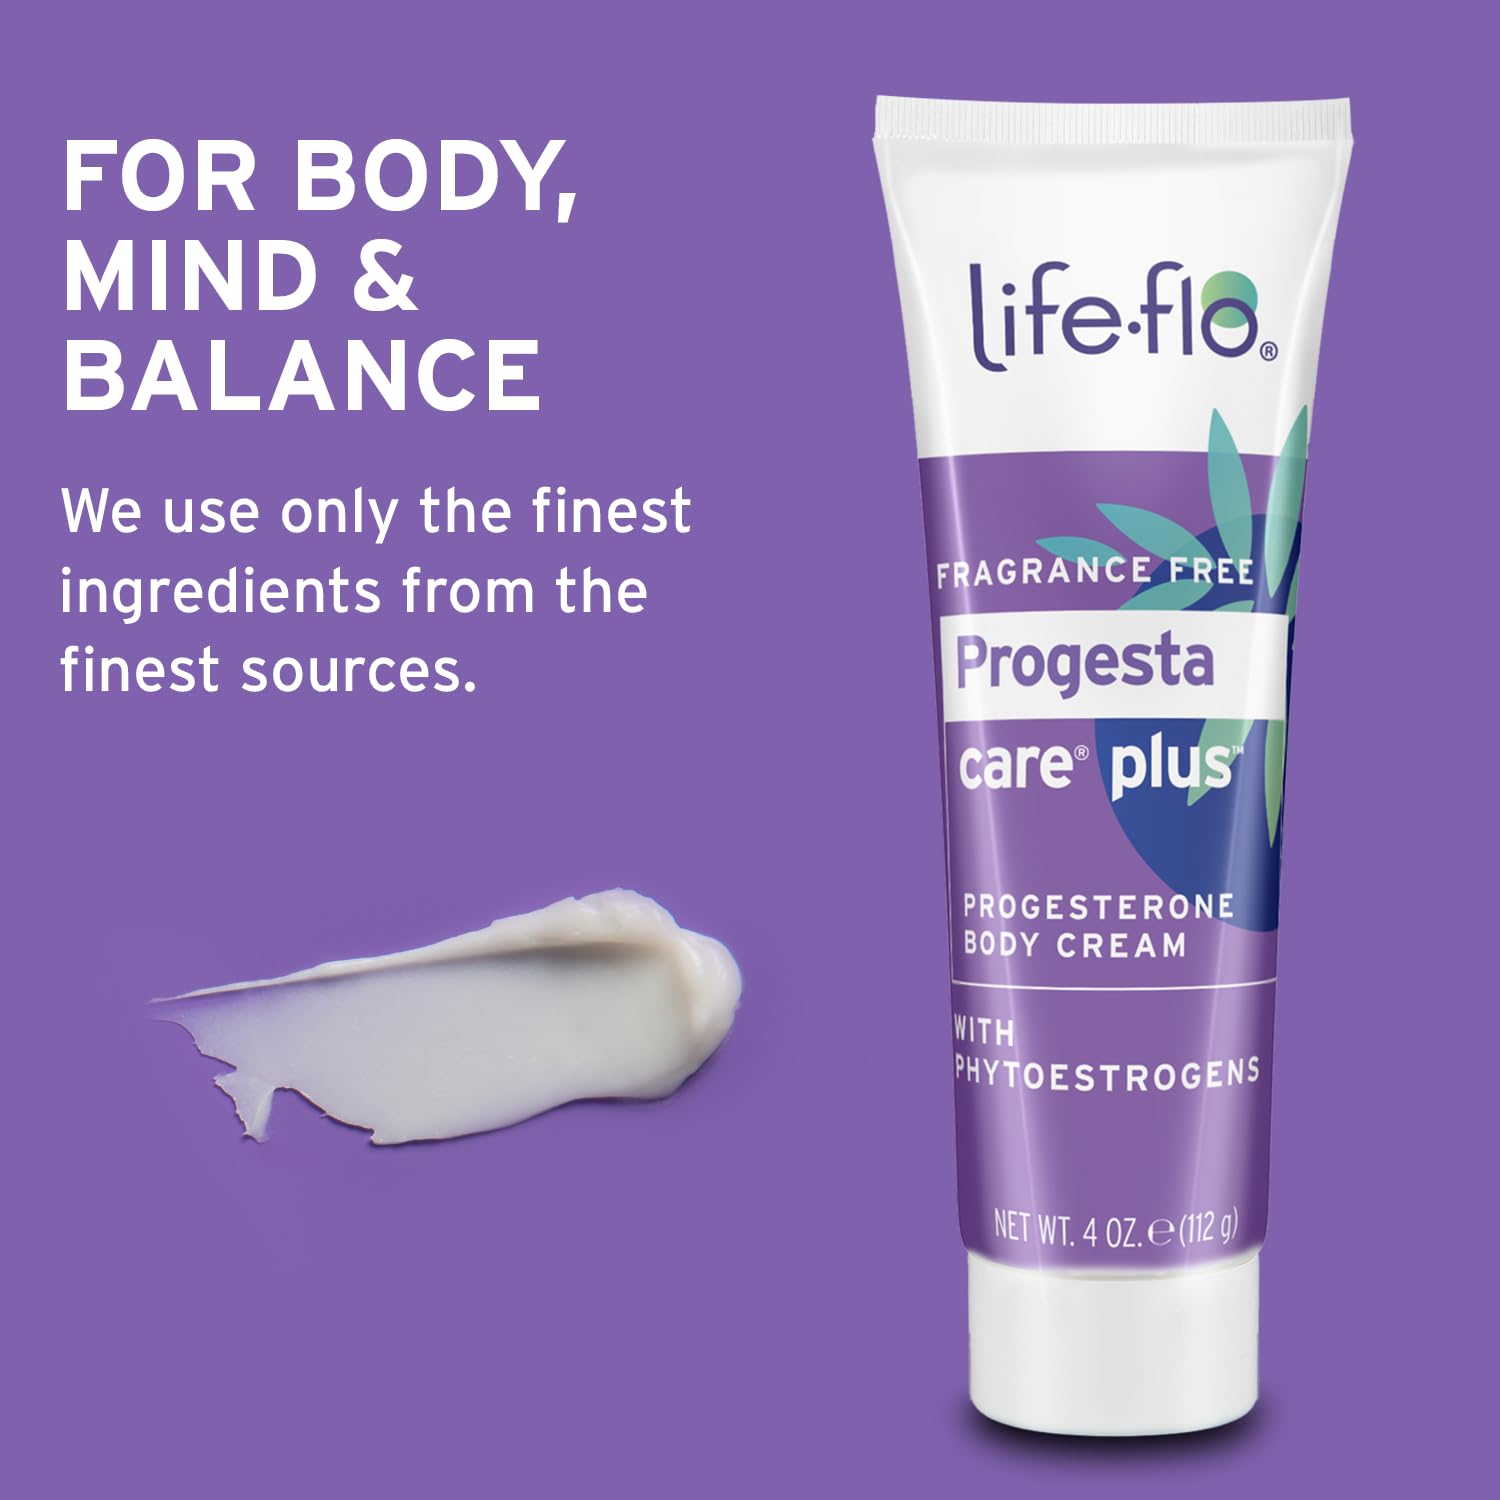 Life-Flo Progesta-Care Plus, Progesterone Cream for Women with 20mg USP Progesterone & Phytoestrogens, May Help Support a Woman’s Healthy Balance at Midlife, Fragrance Free, Made Without Parabens, 4oz : Womens Health Medications And Treatments : Health & Household